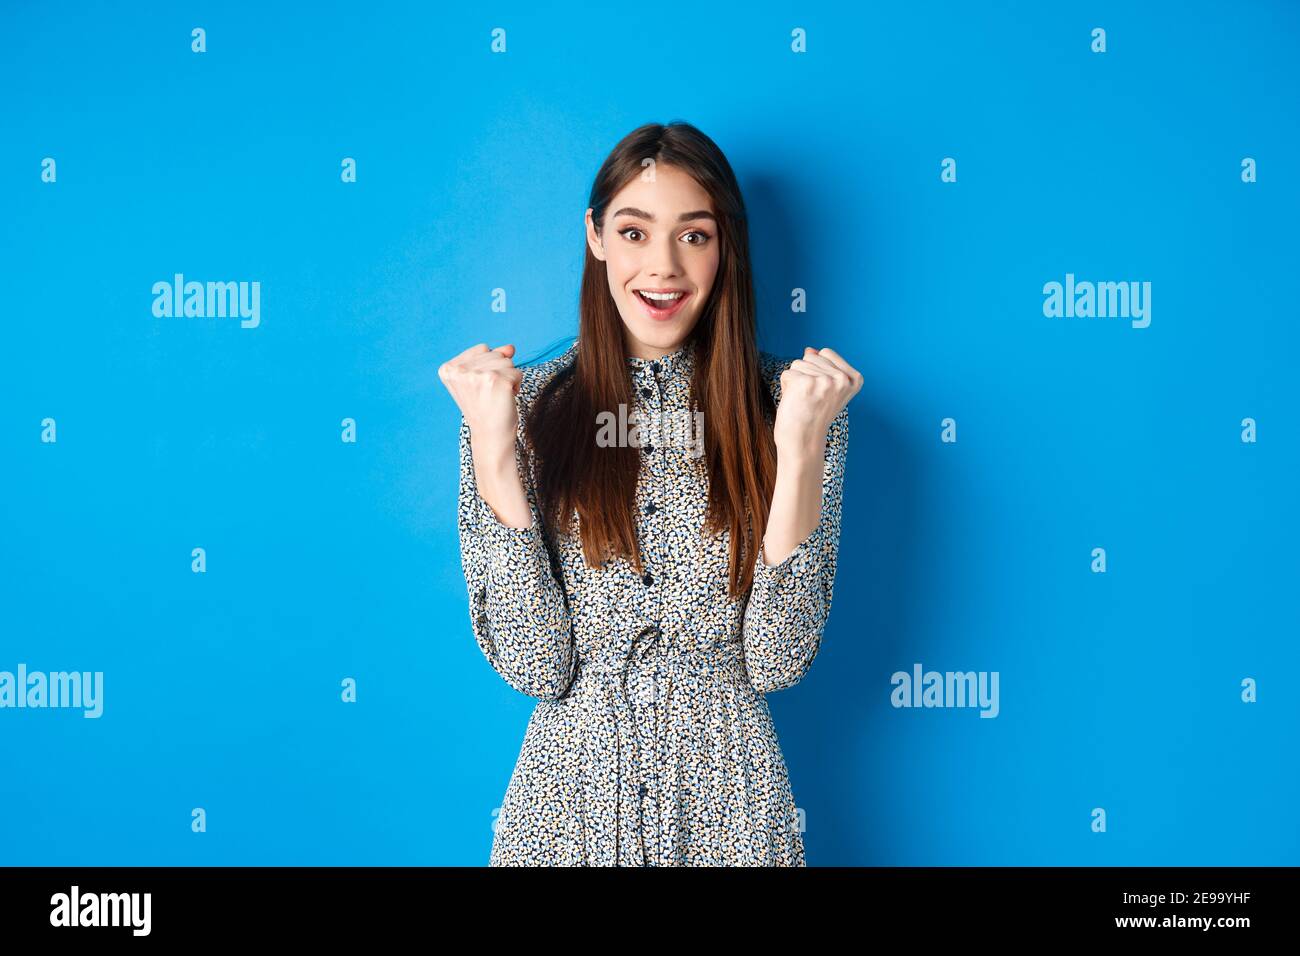 Excited woman looking relieved and hopeful, making fist pump and smiling, winning prize, celebrating achievement or victory, standing on blue Stock Photo